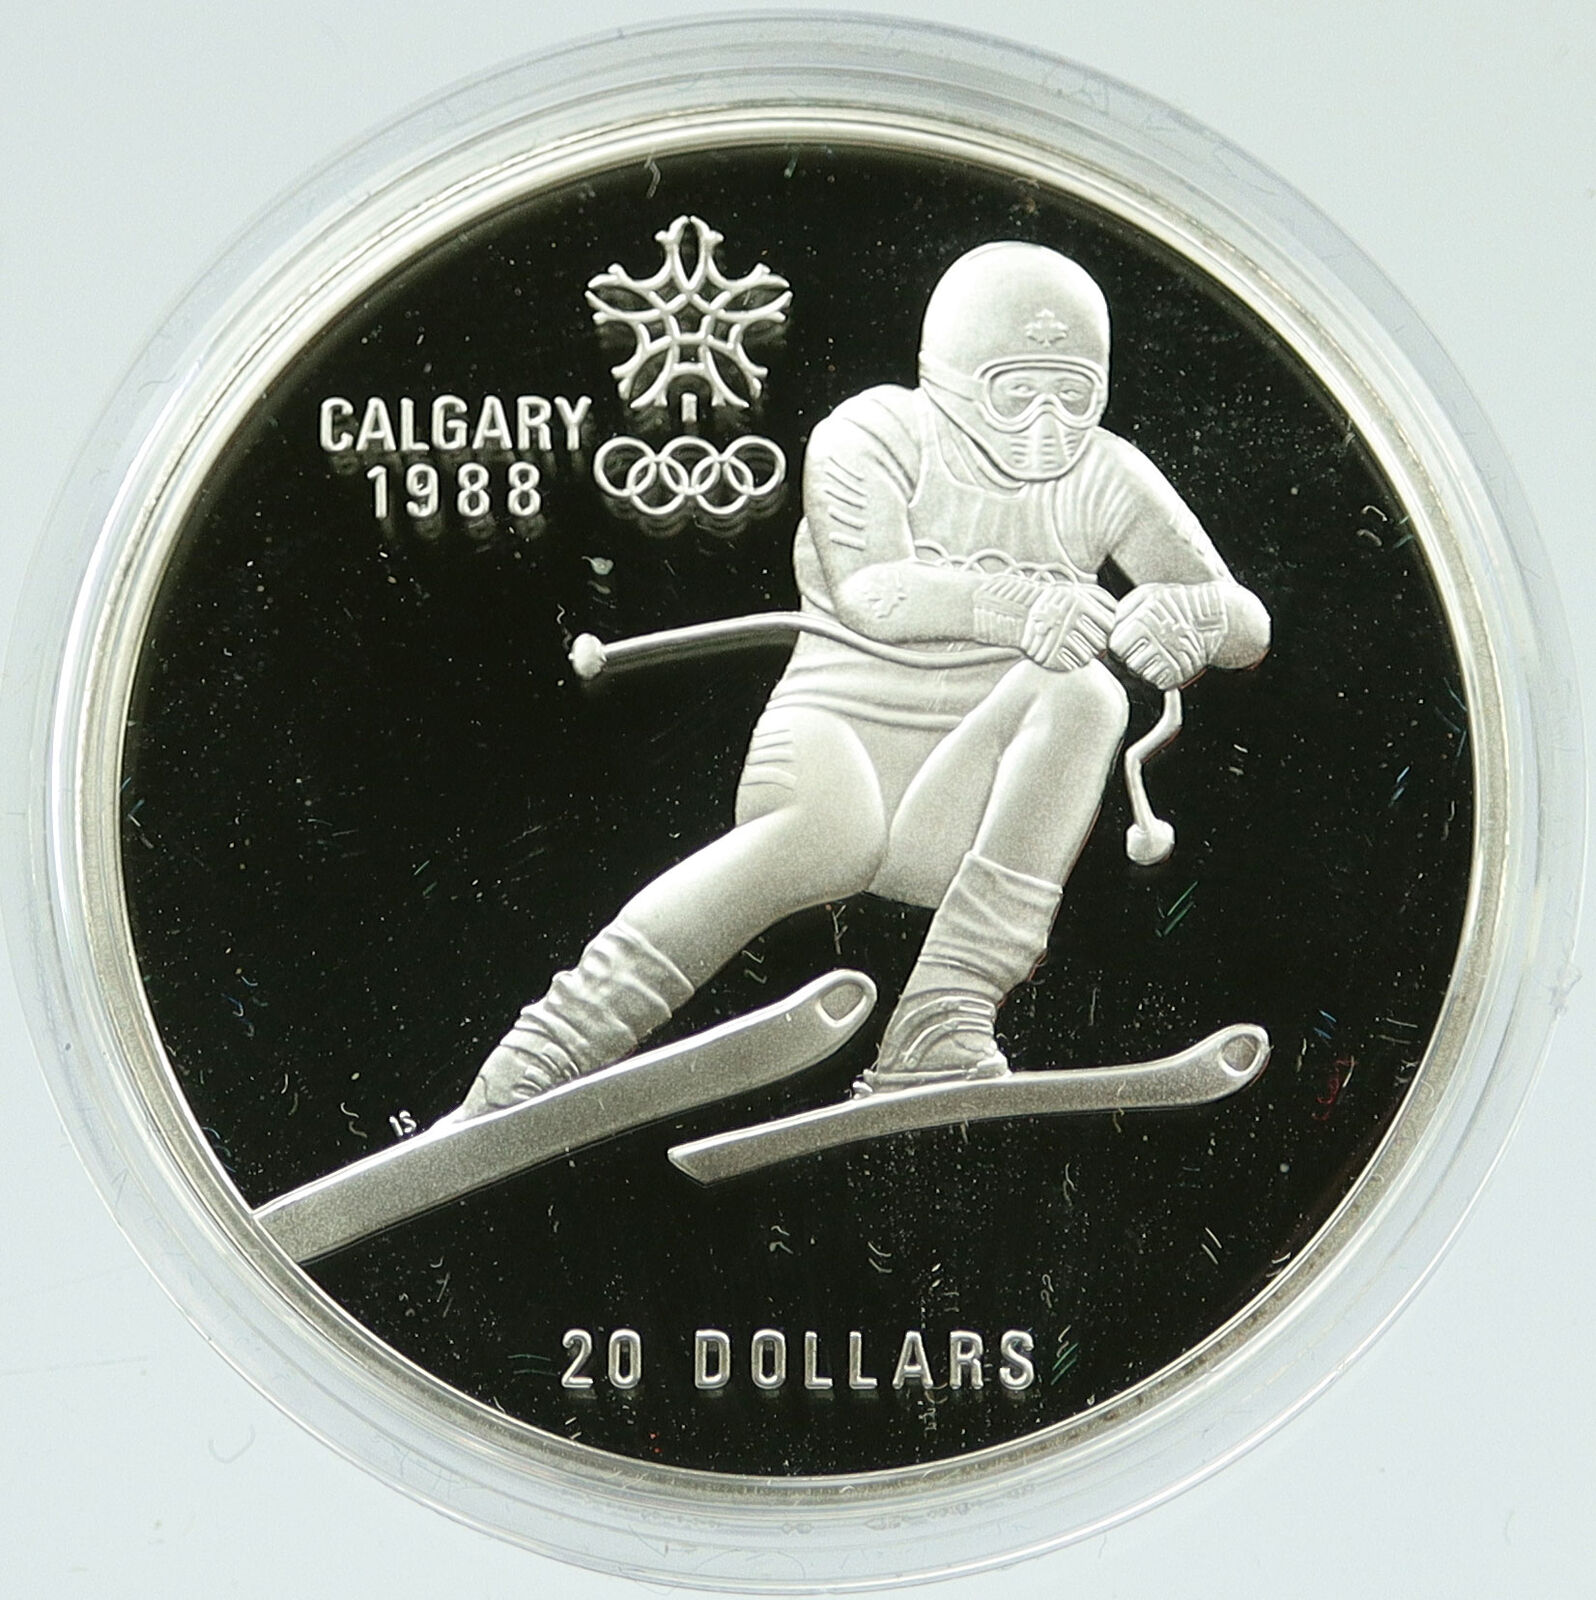 1985 CANADA Old 1988 CALGARY OLYMPICS Skiing OLD Proof Silver $20 Coin i117260